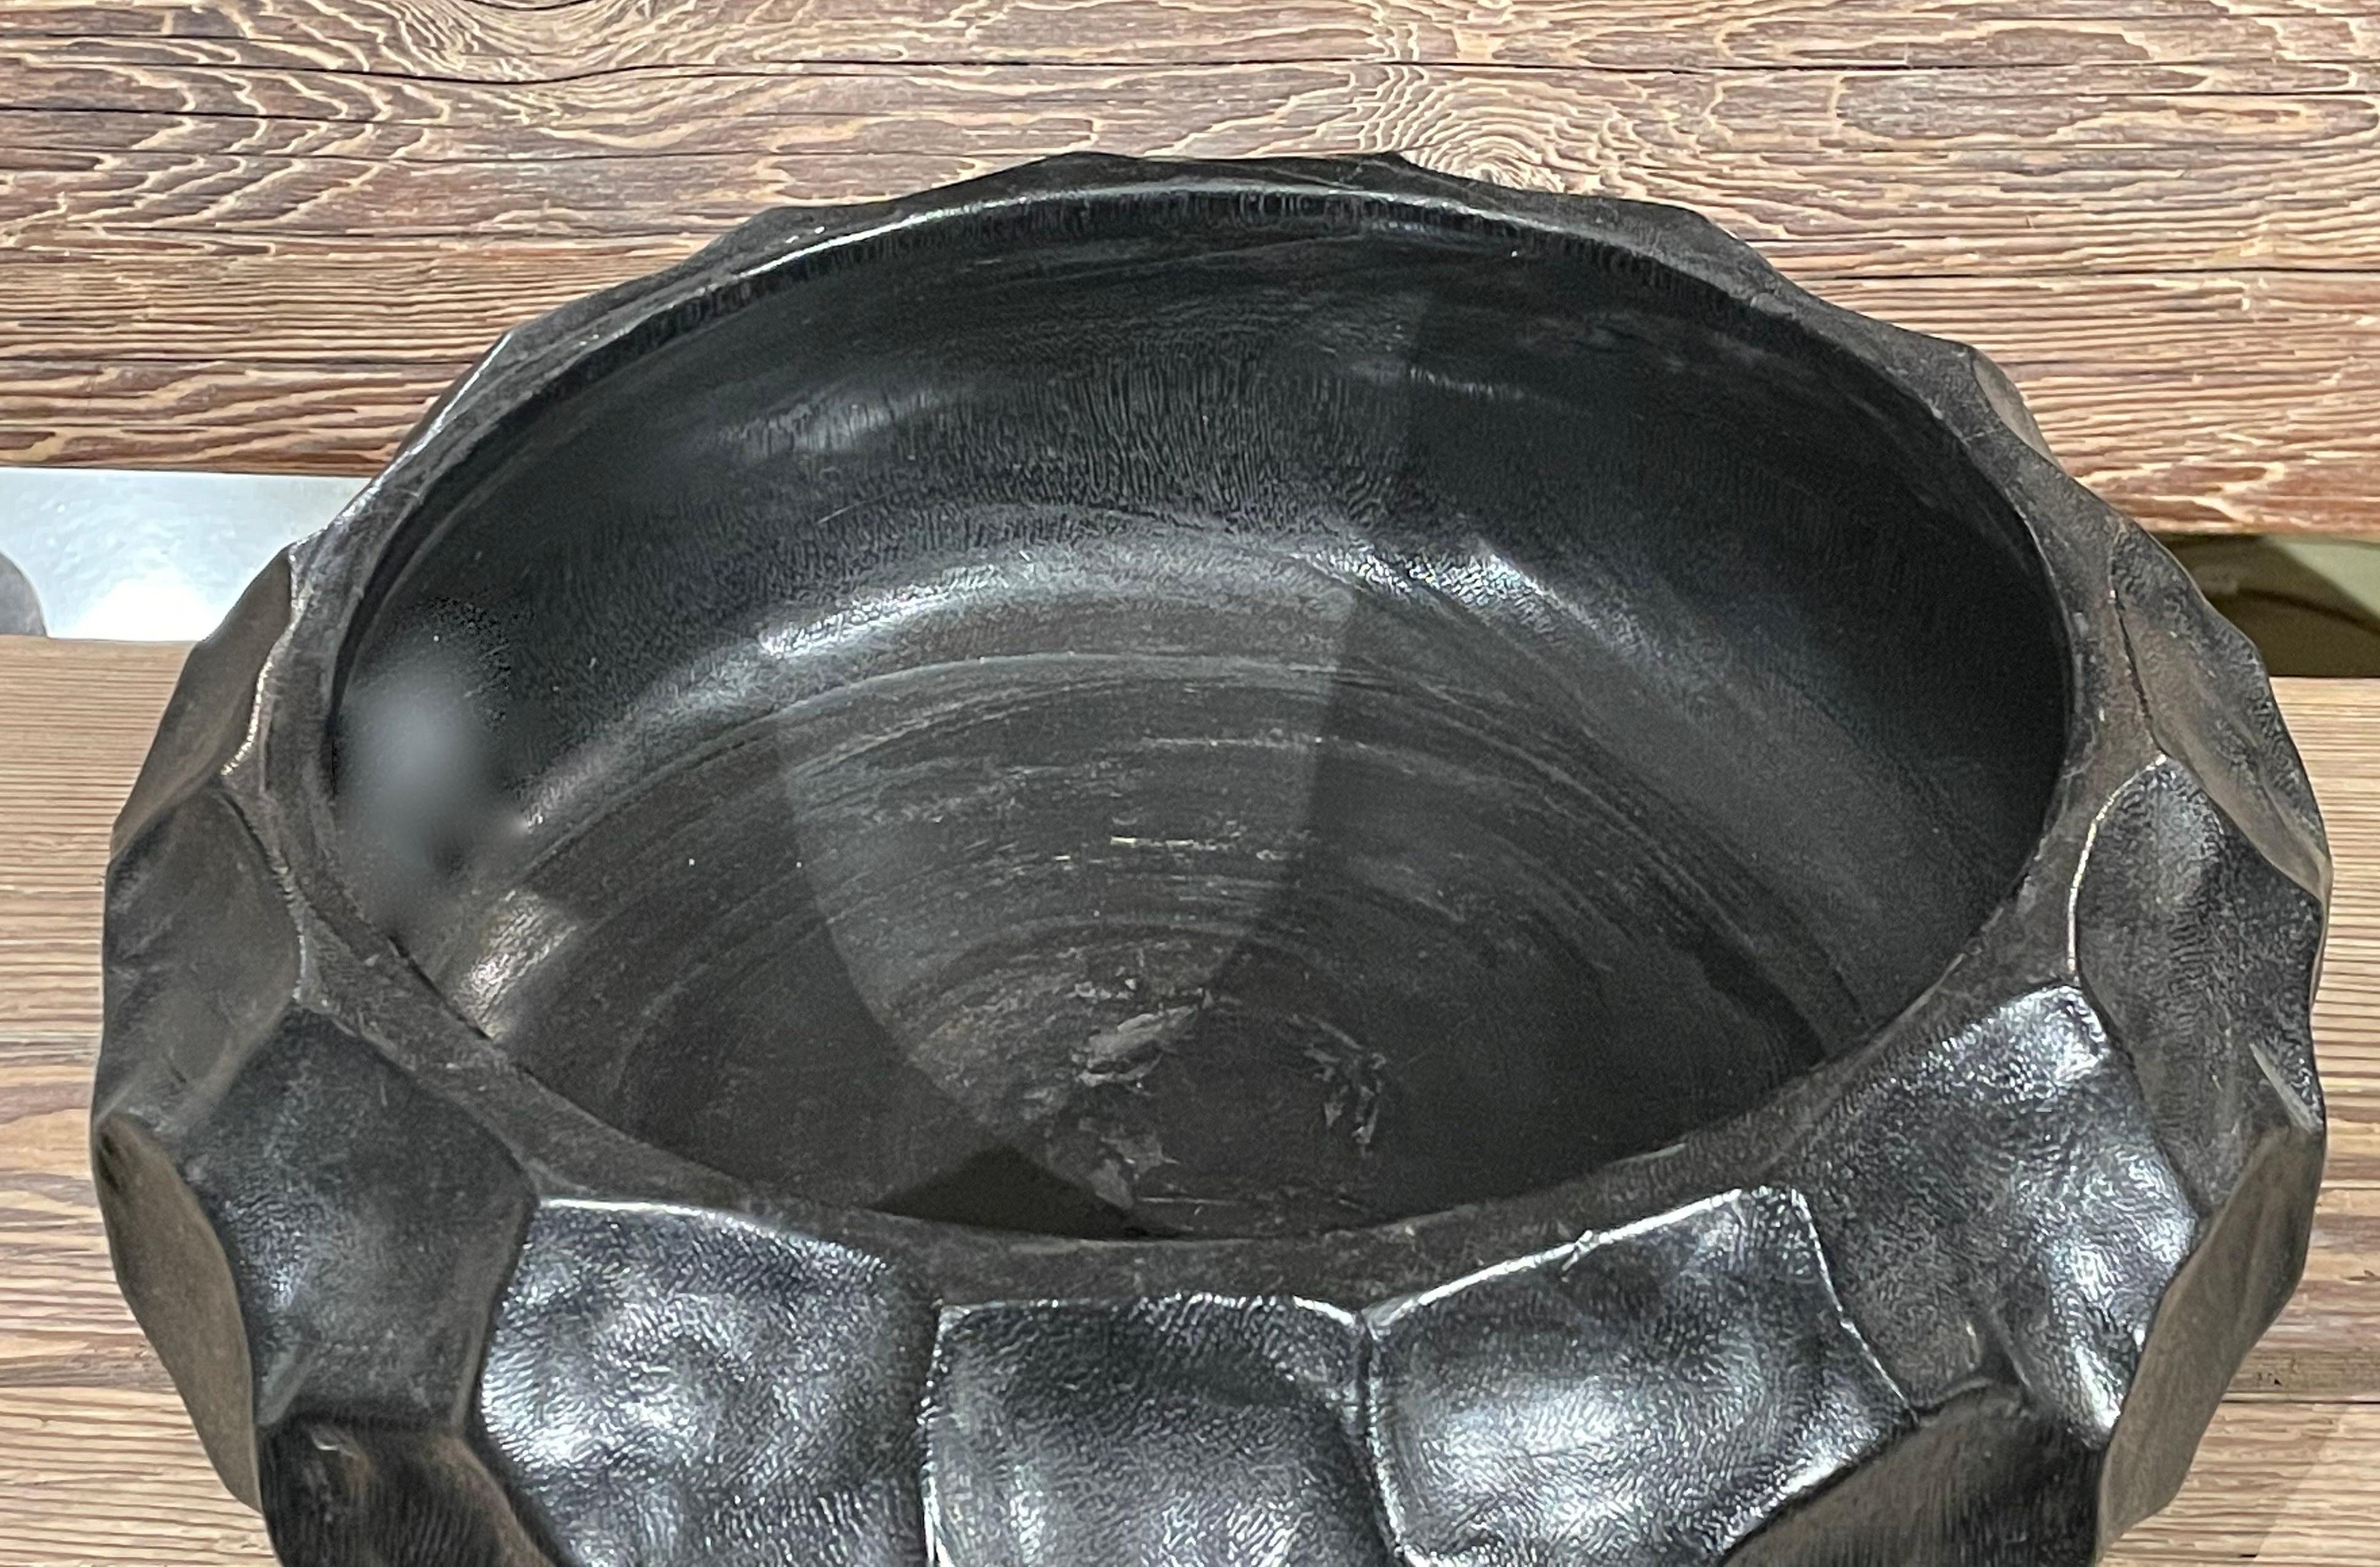 Contemporary Indonesian ebonized bowl carved from a palm tree.
Arriving TBD.